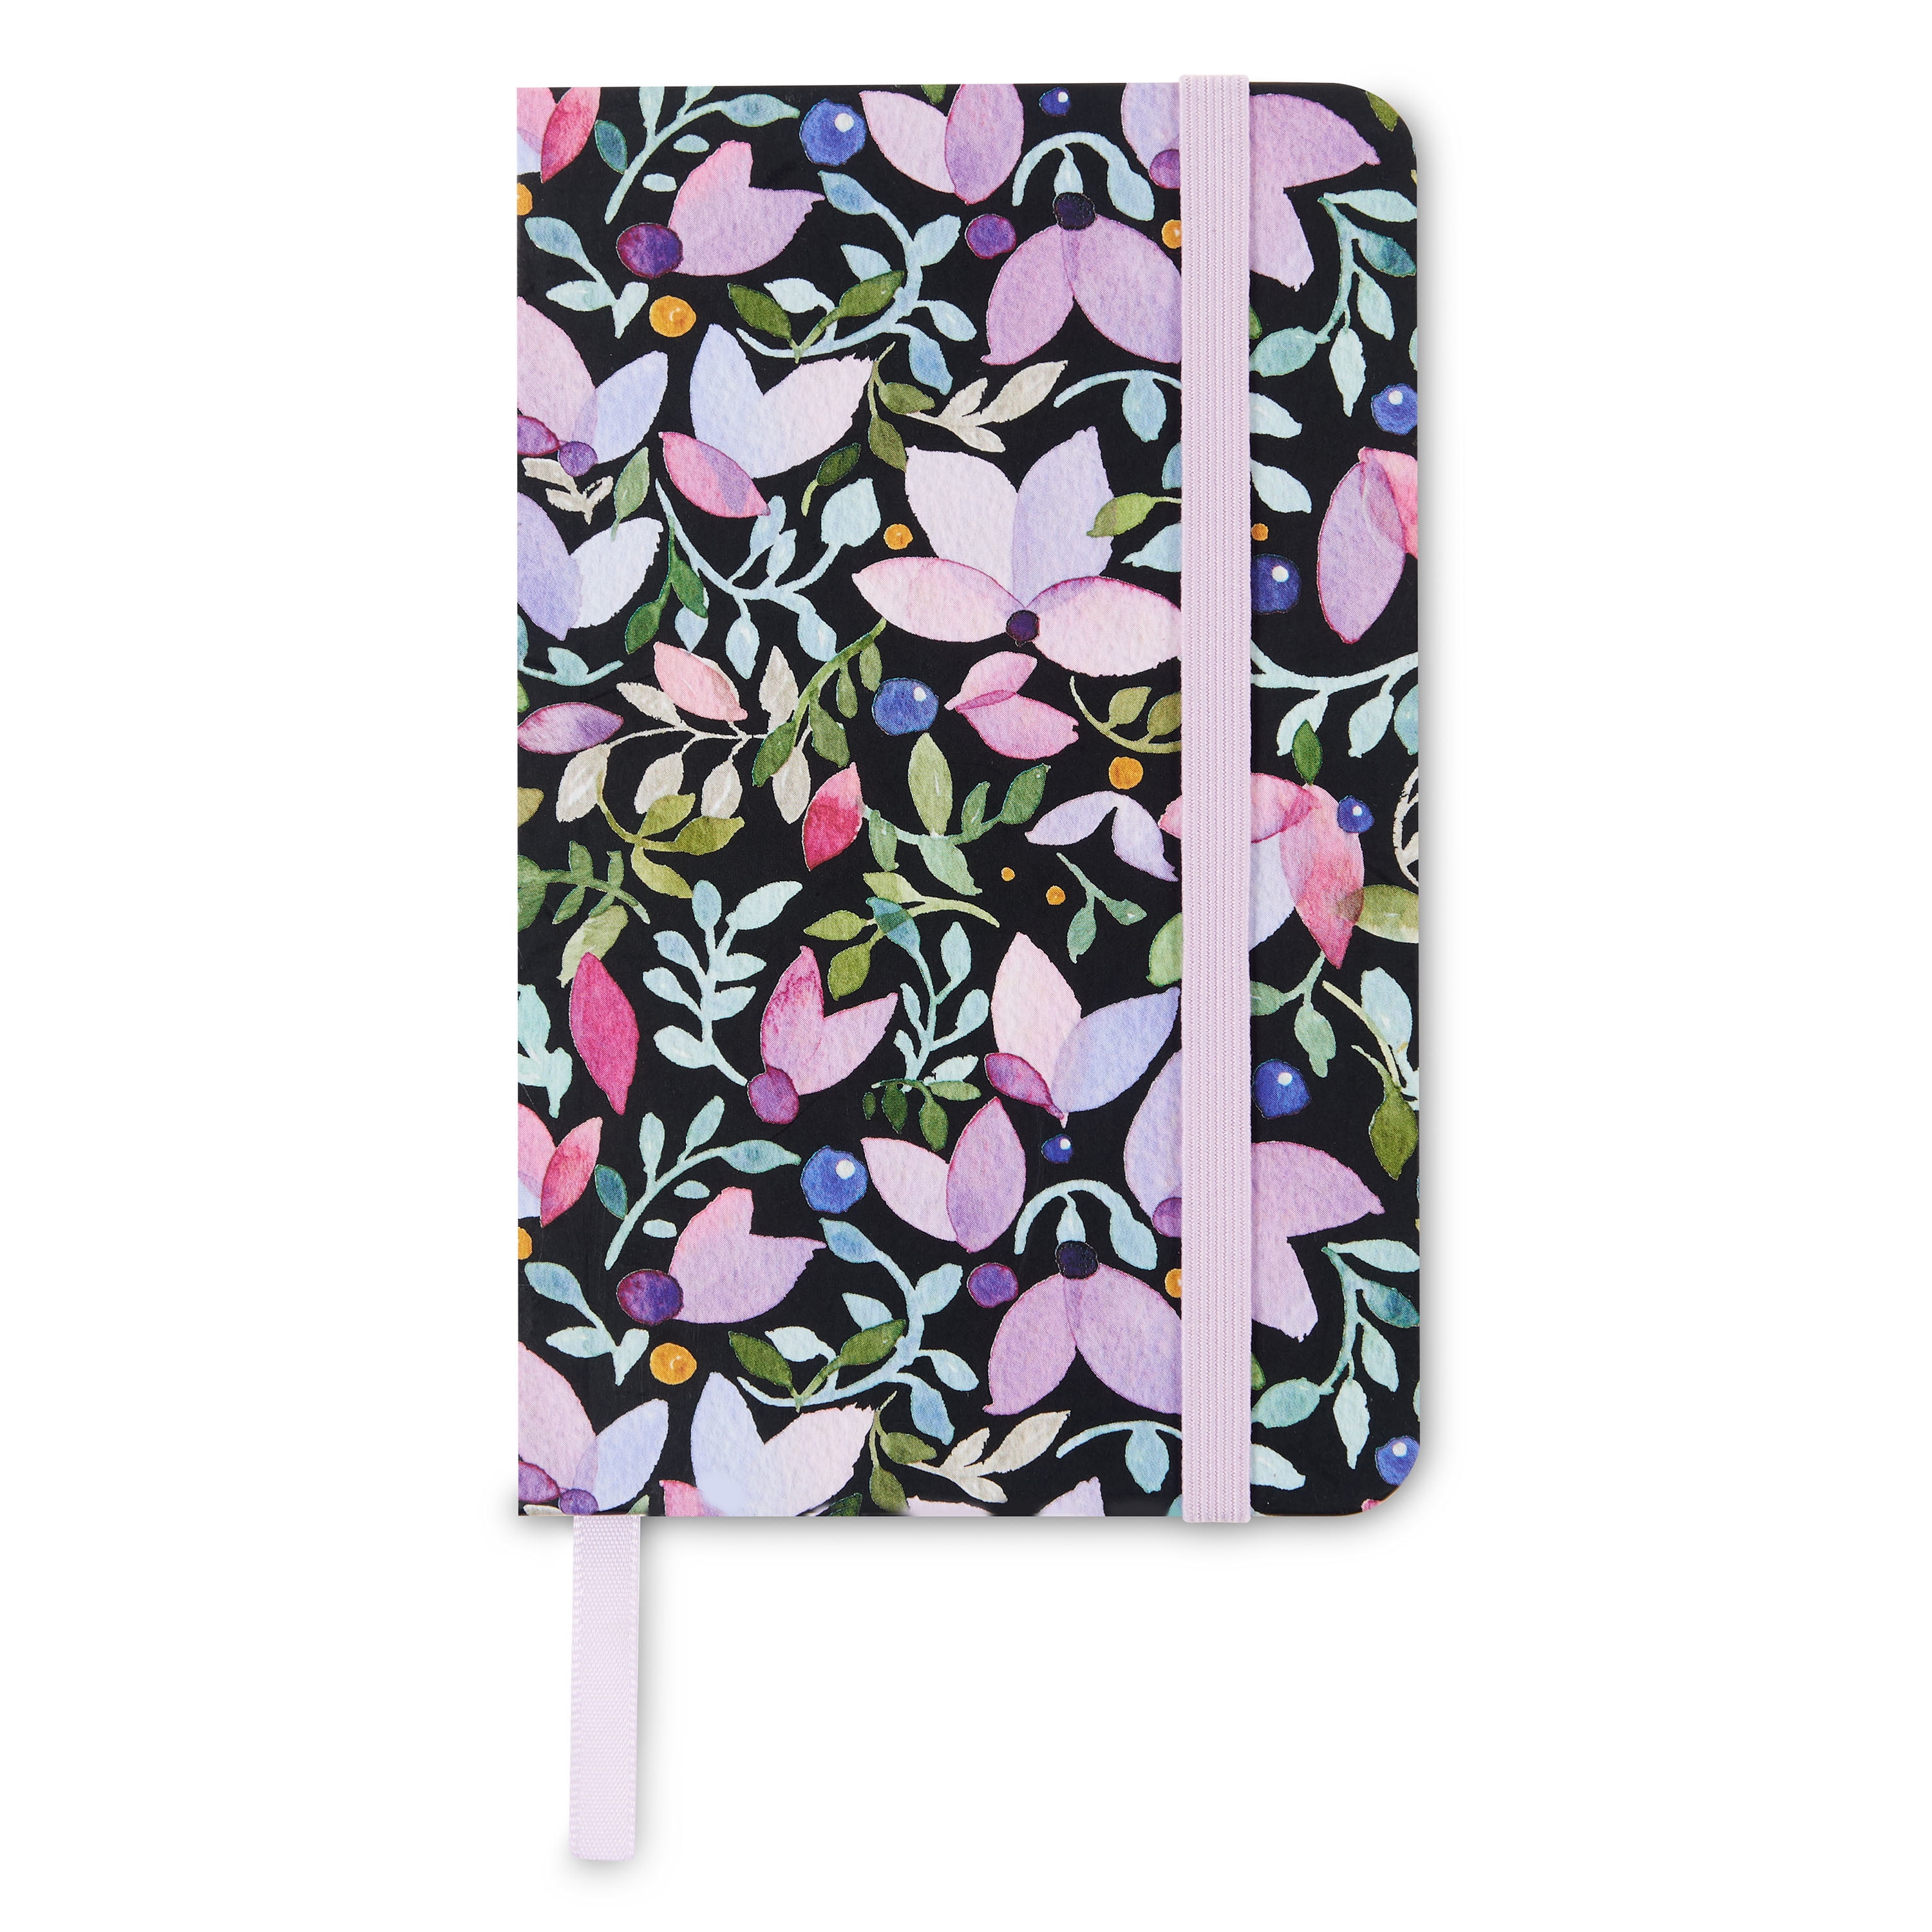 Pen+Gear Small Hardcover Journal, Floral, 160 Pages